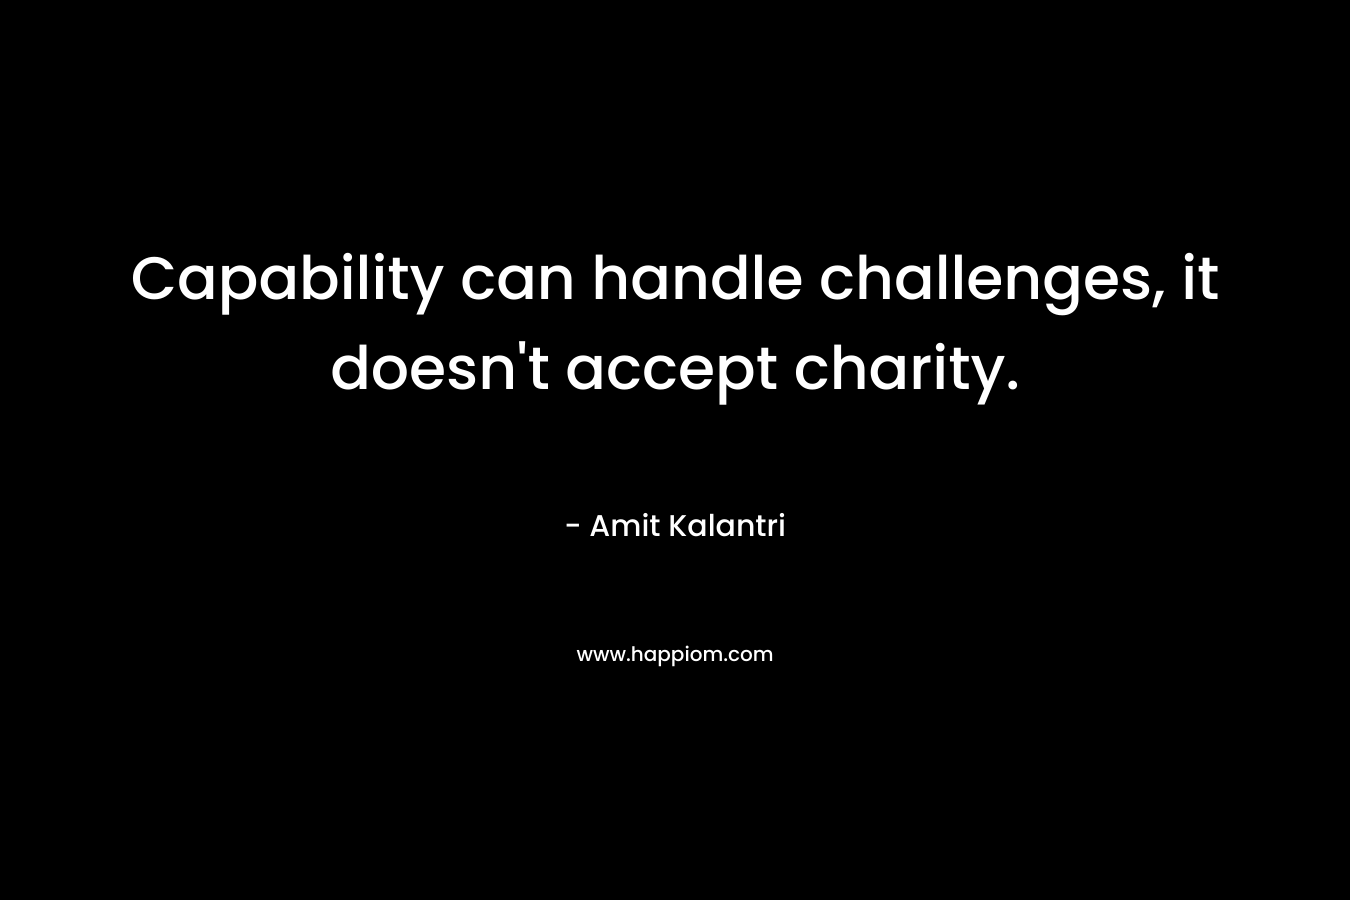 Capability can handle challenges, it doesn't accept charity.